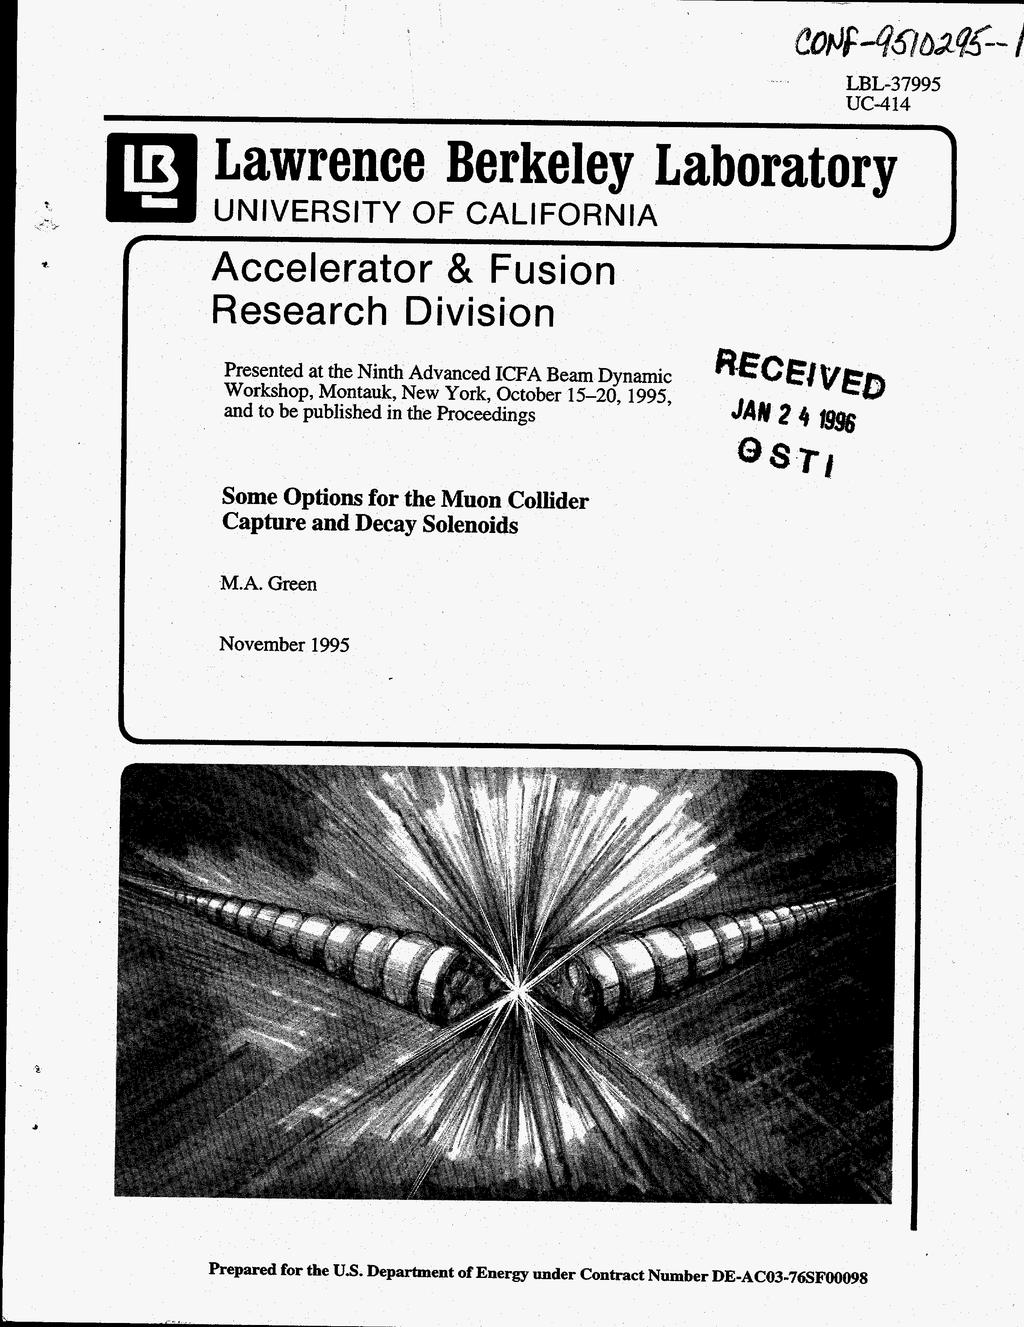 e LBL-37995 UC-414 Lawrence Berkeley Laboratory UNIVERSITY OF CALIFORNIA Accelerator & Fusion Research Division Presented at the Ninth Advanced ICFA Beam Dynamic Workshop, Montauk, New York, October